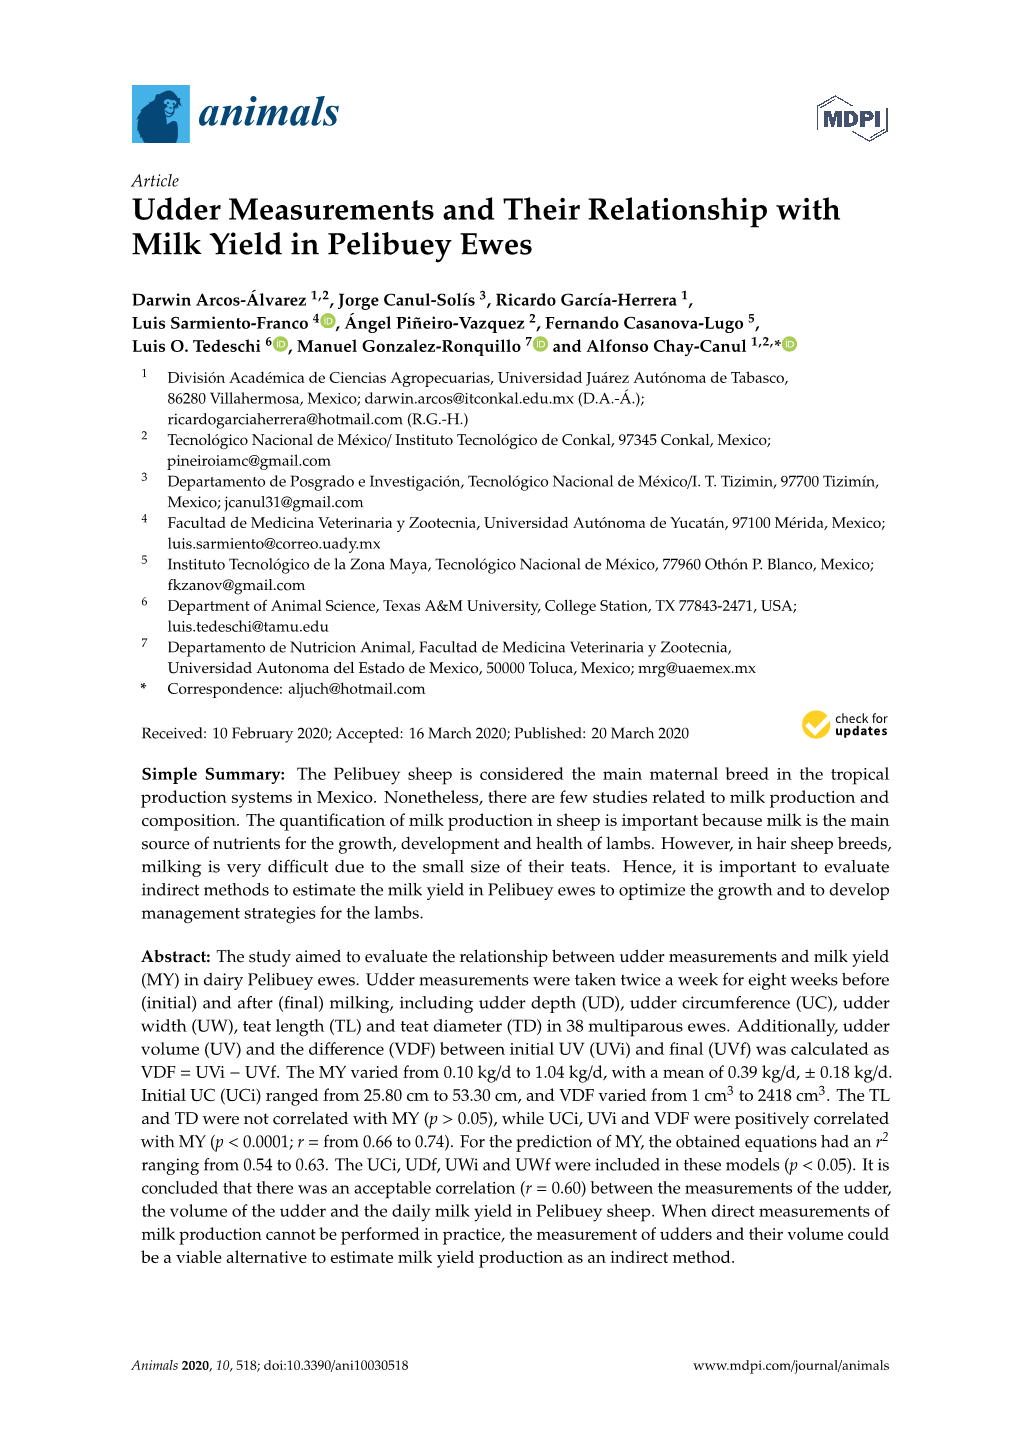 Udder Measurements and Their Relationship with Milk Yield in Pelibuey Ewes